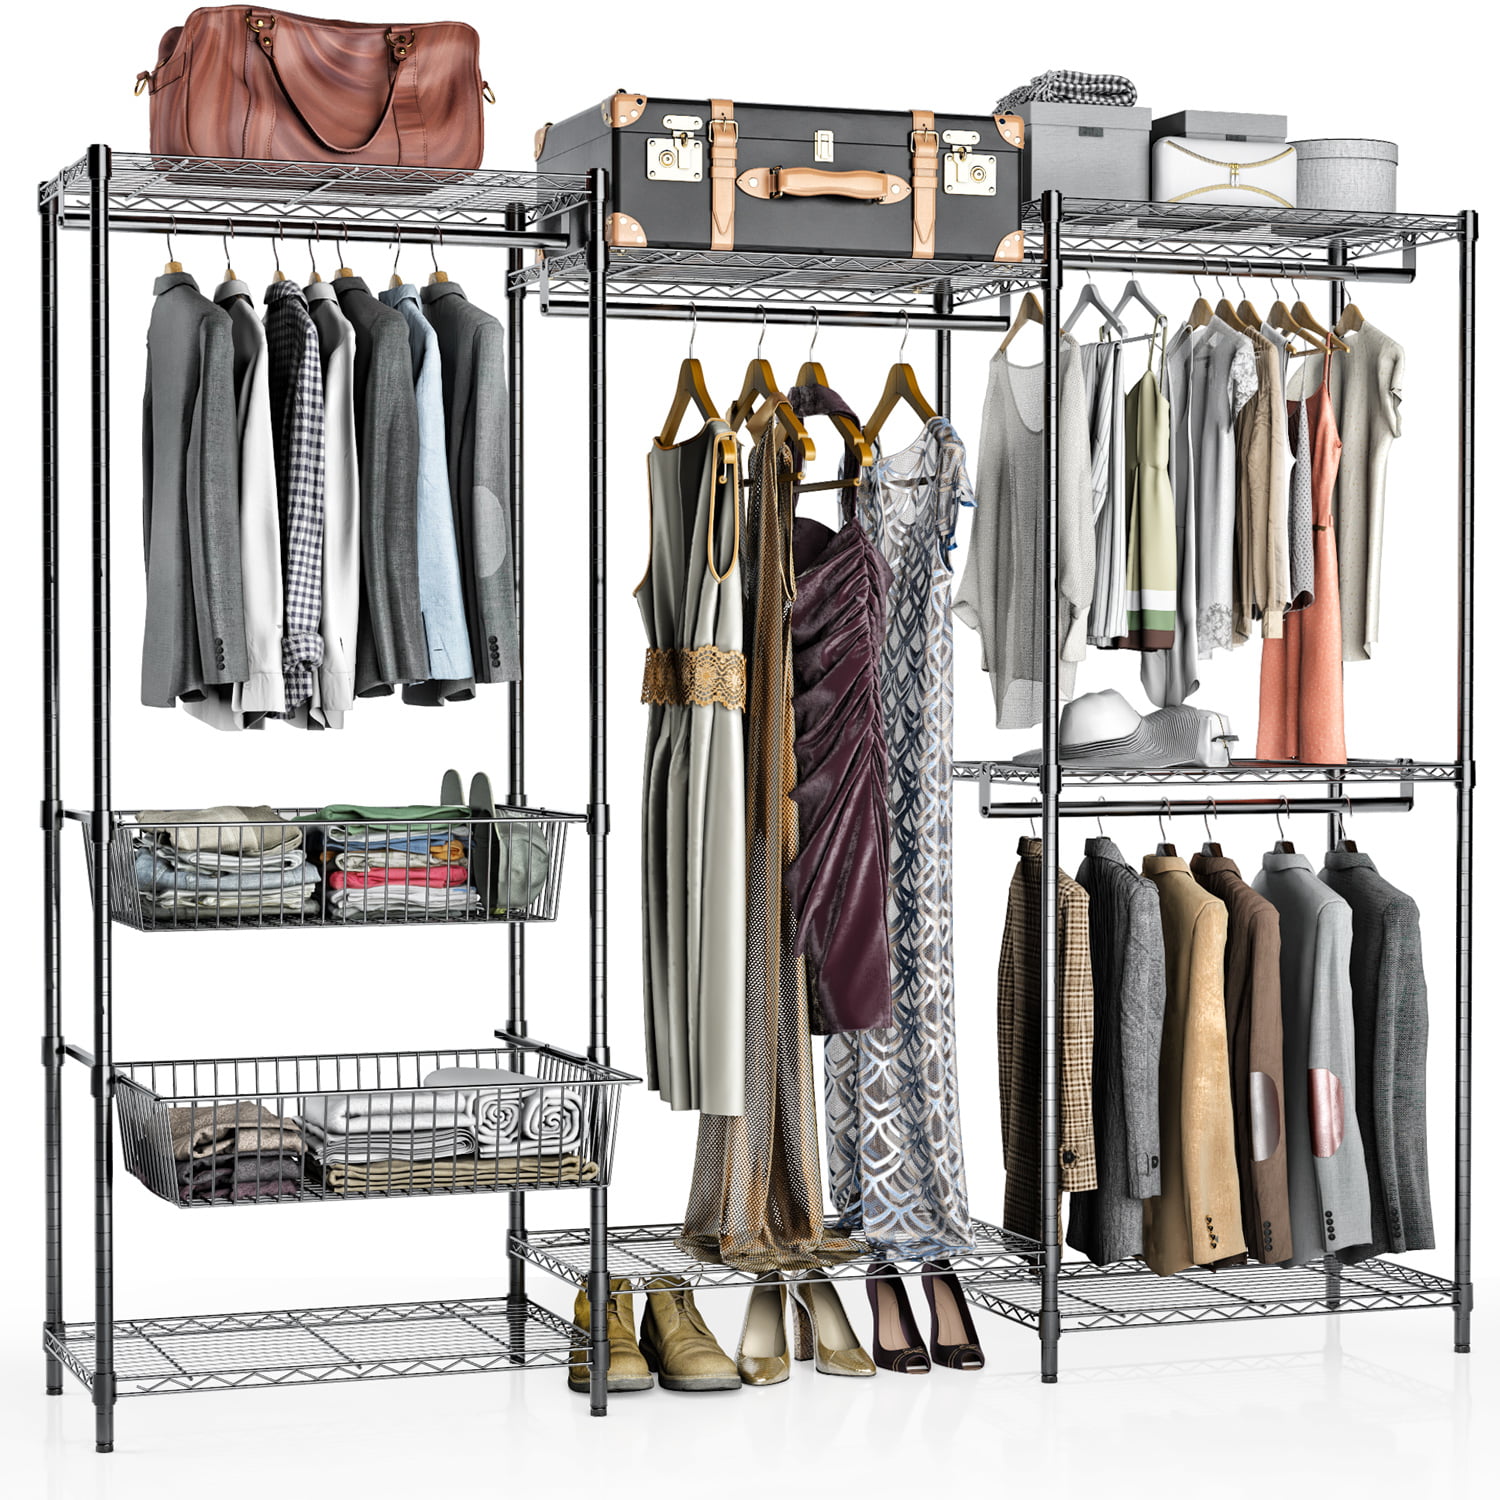 Adjustable Clothes Rack with 2 Tier Metal Shelf and Wheels YUSONG Double Hanging Rail Telescopic Garment Rack Black 